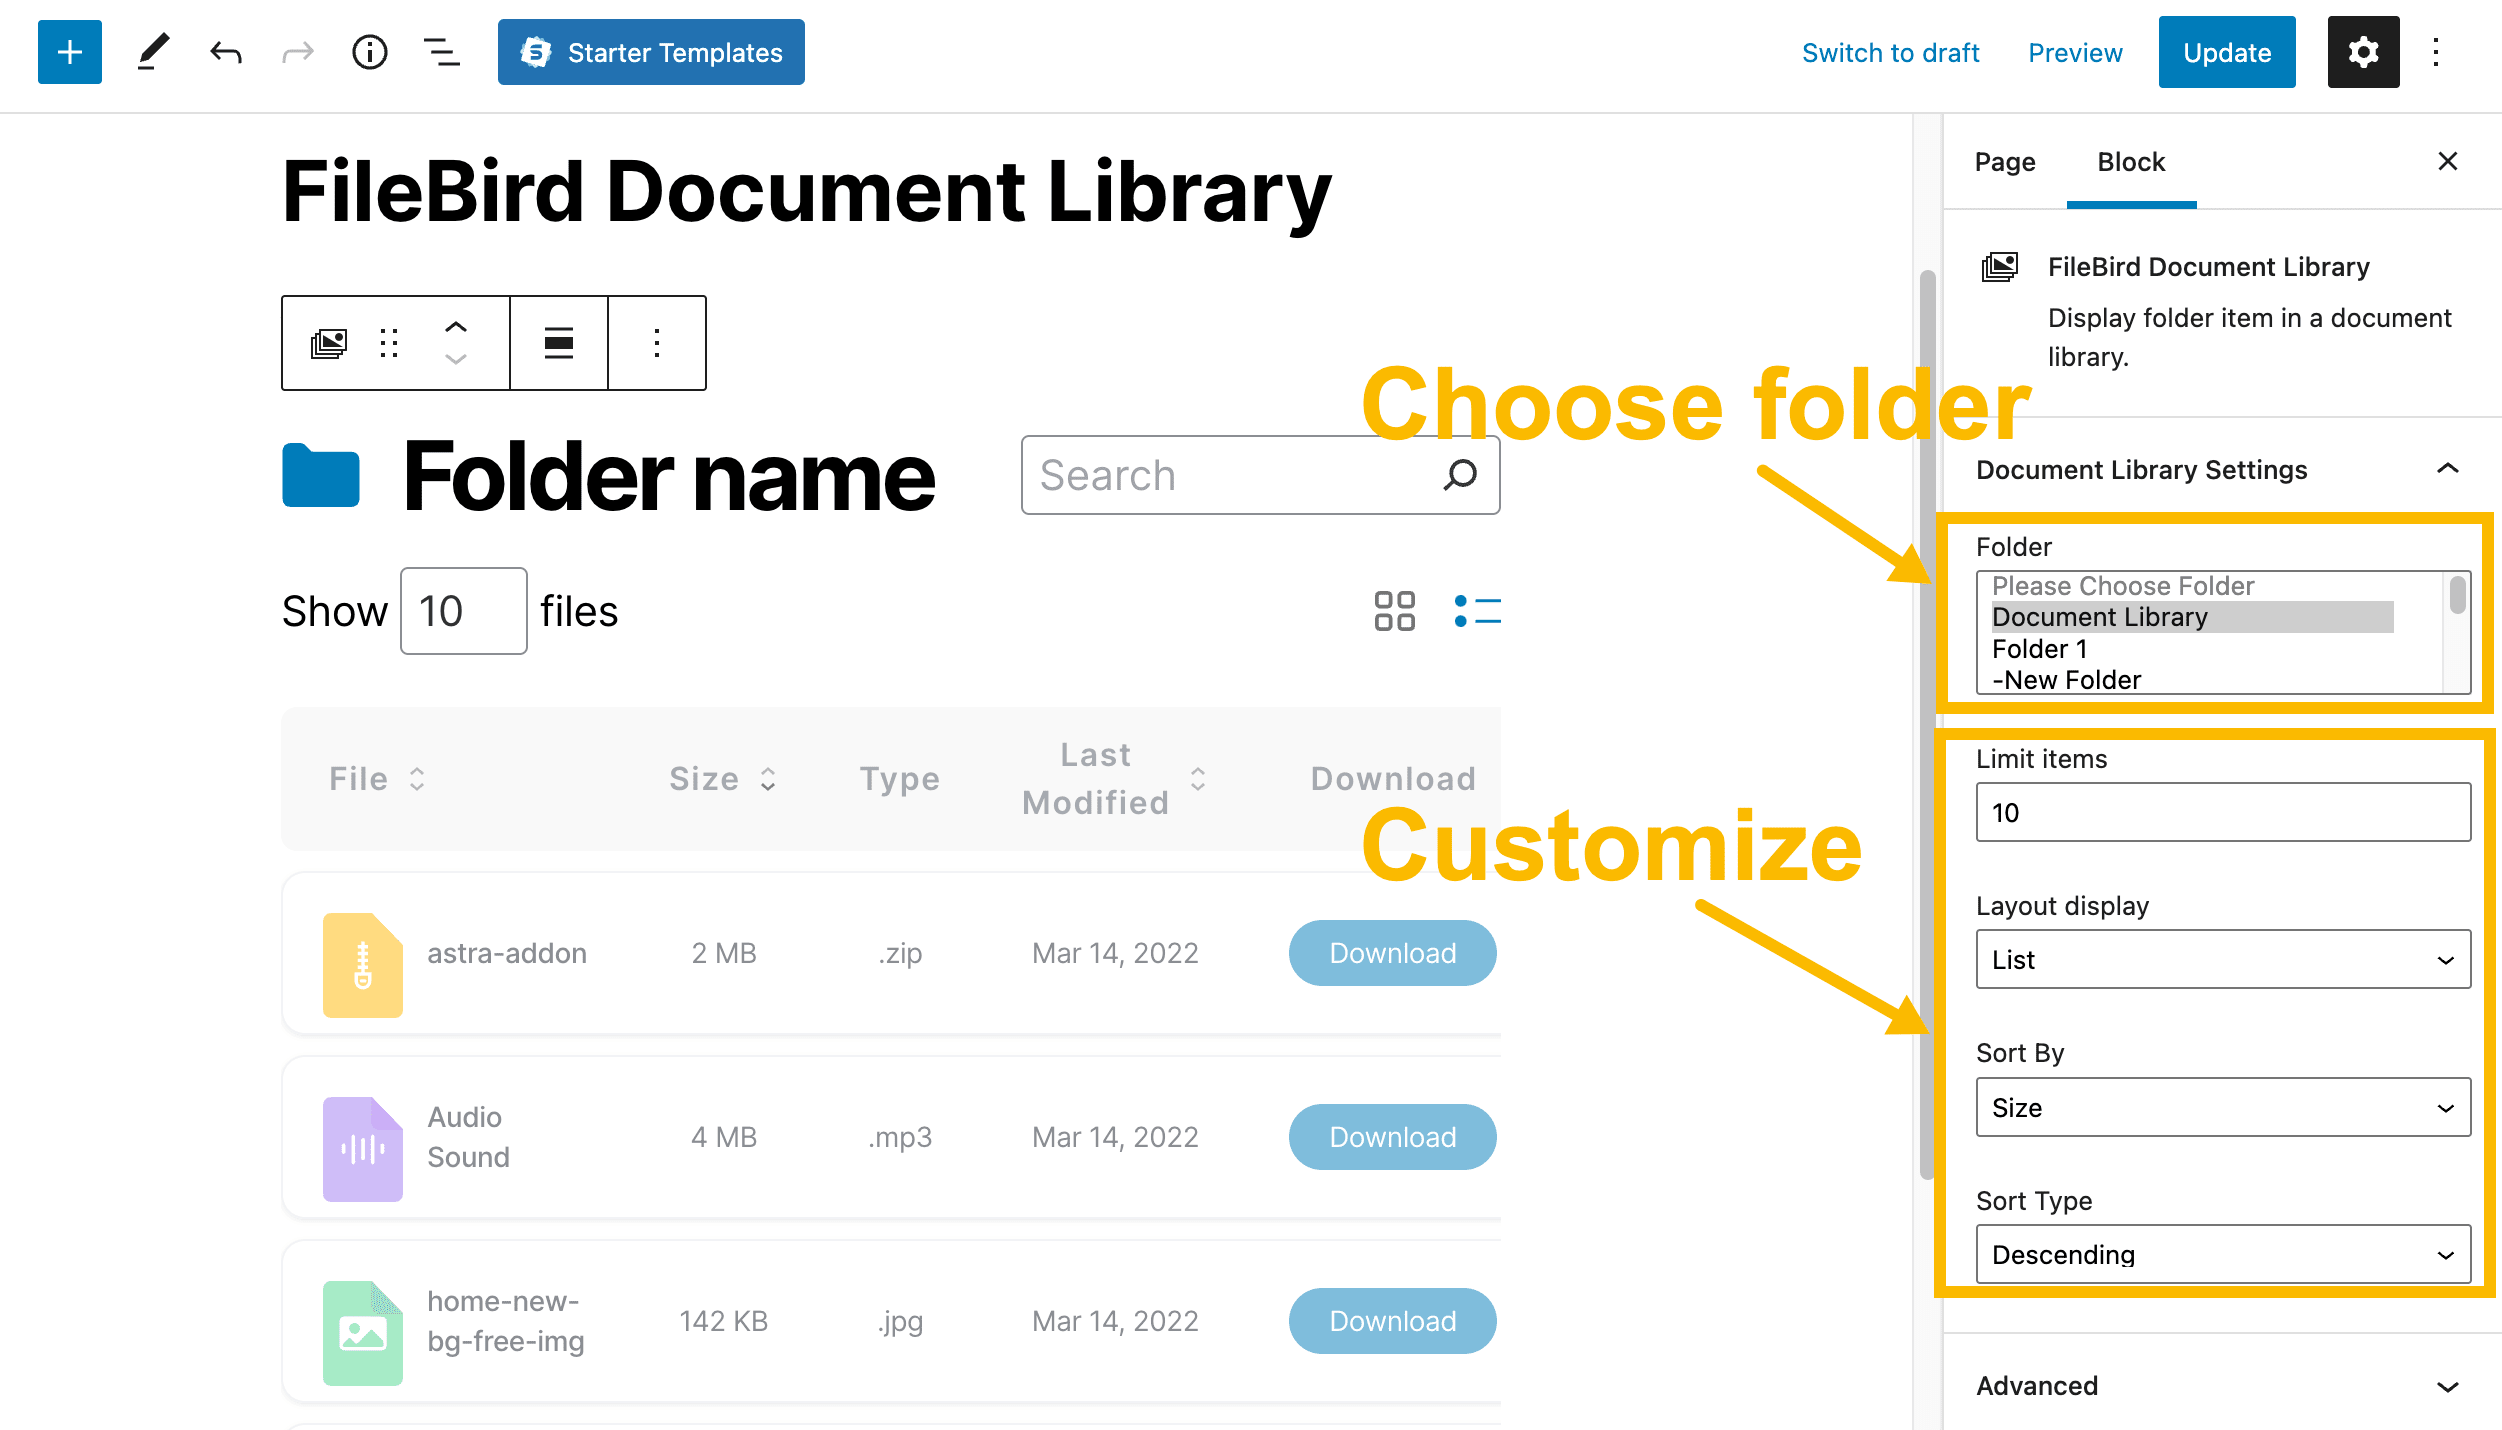 filebird - how to create document library in Gutenberg